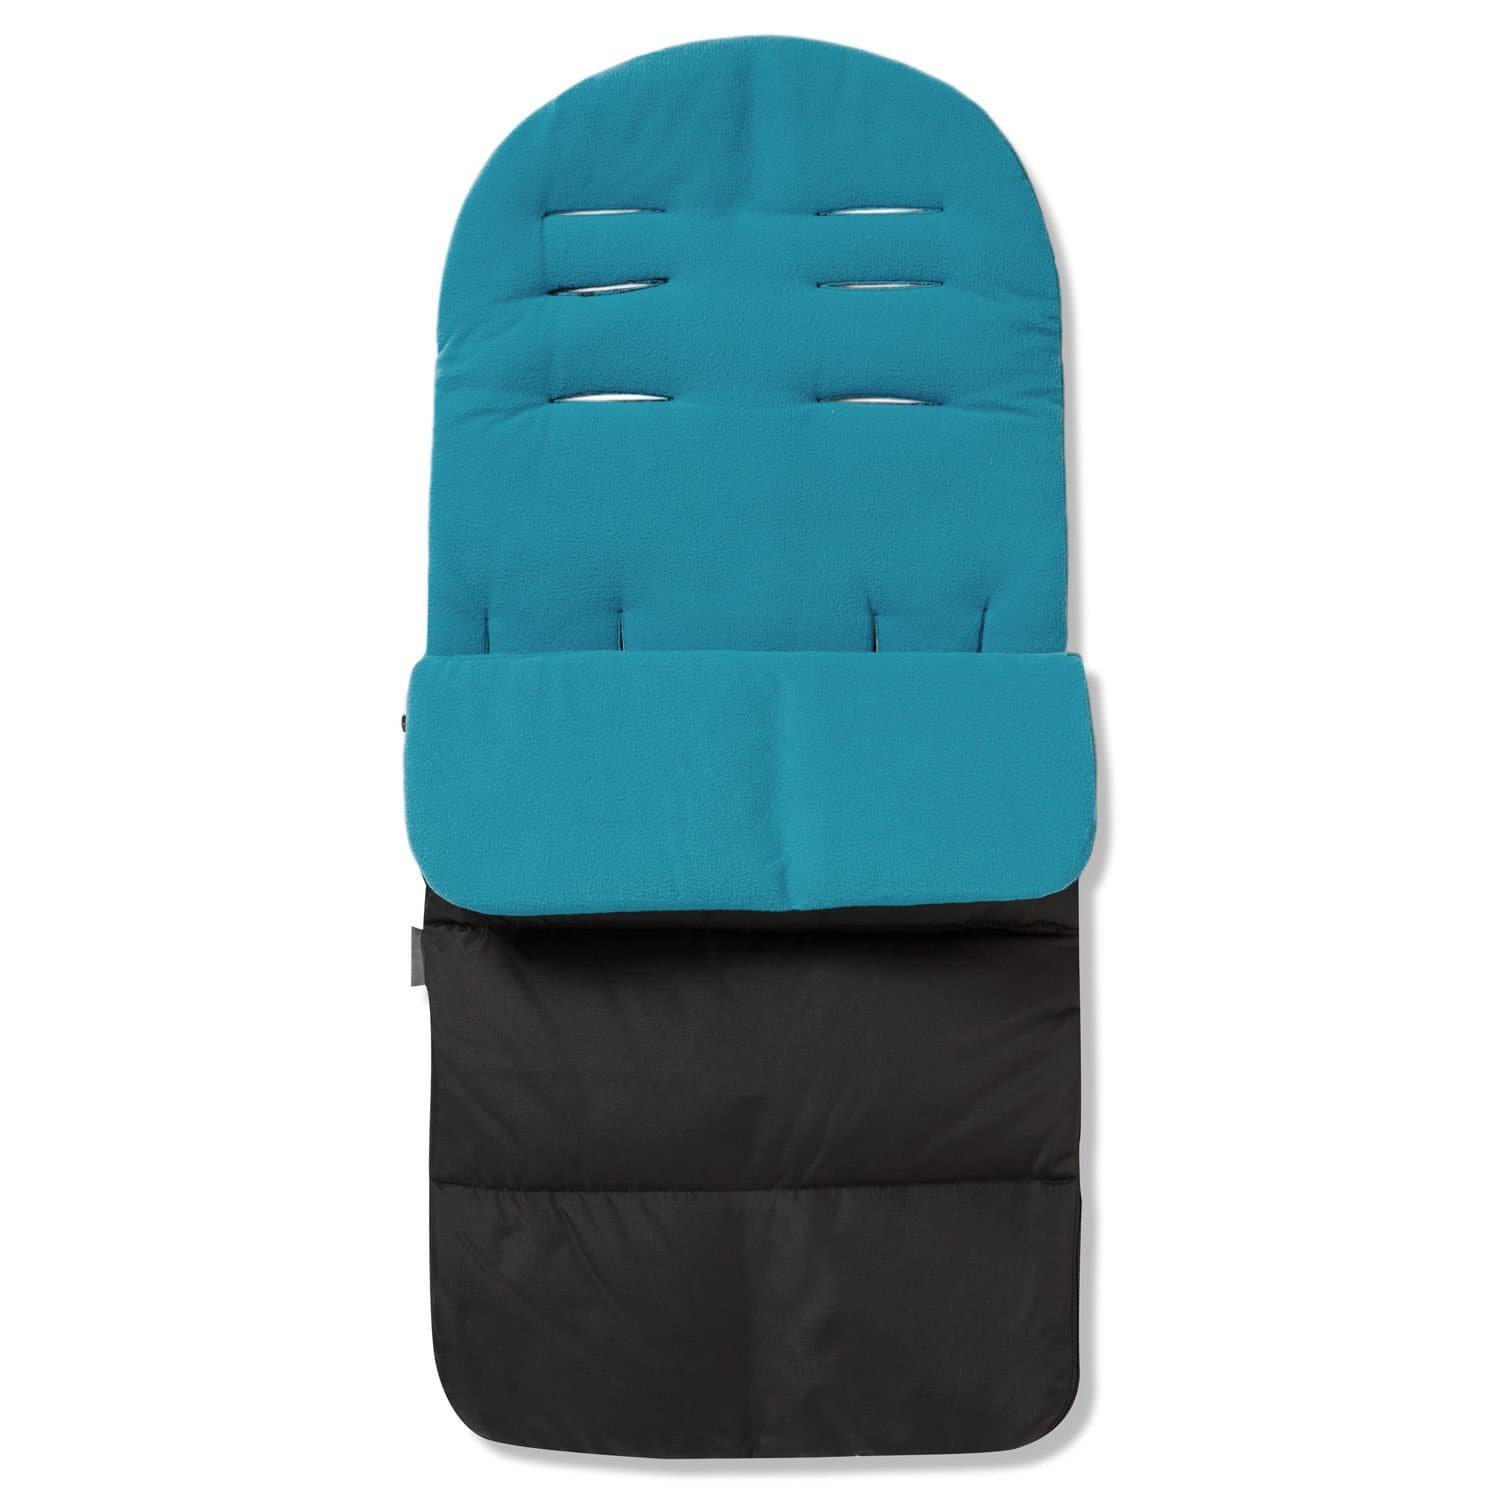 Premium Footmuff / Cosy Toes Compatible with Babyzen - Ocean Blue / Fits All Models | For Your Little One